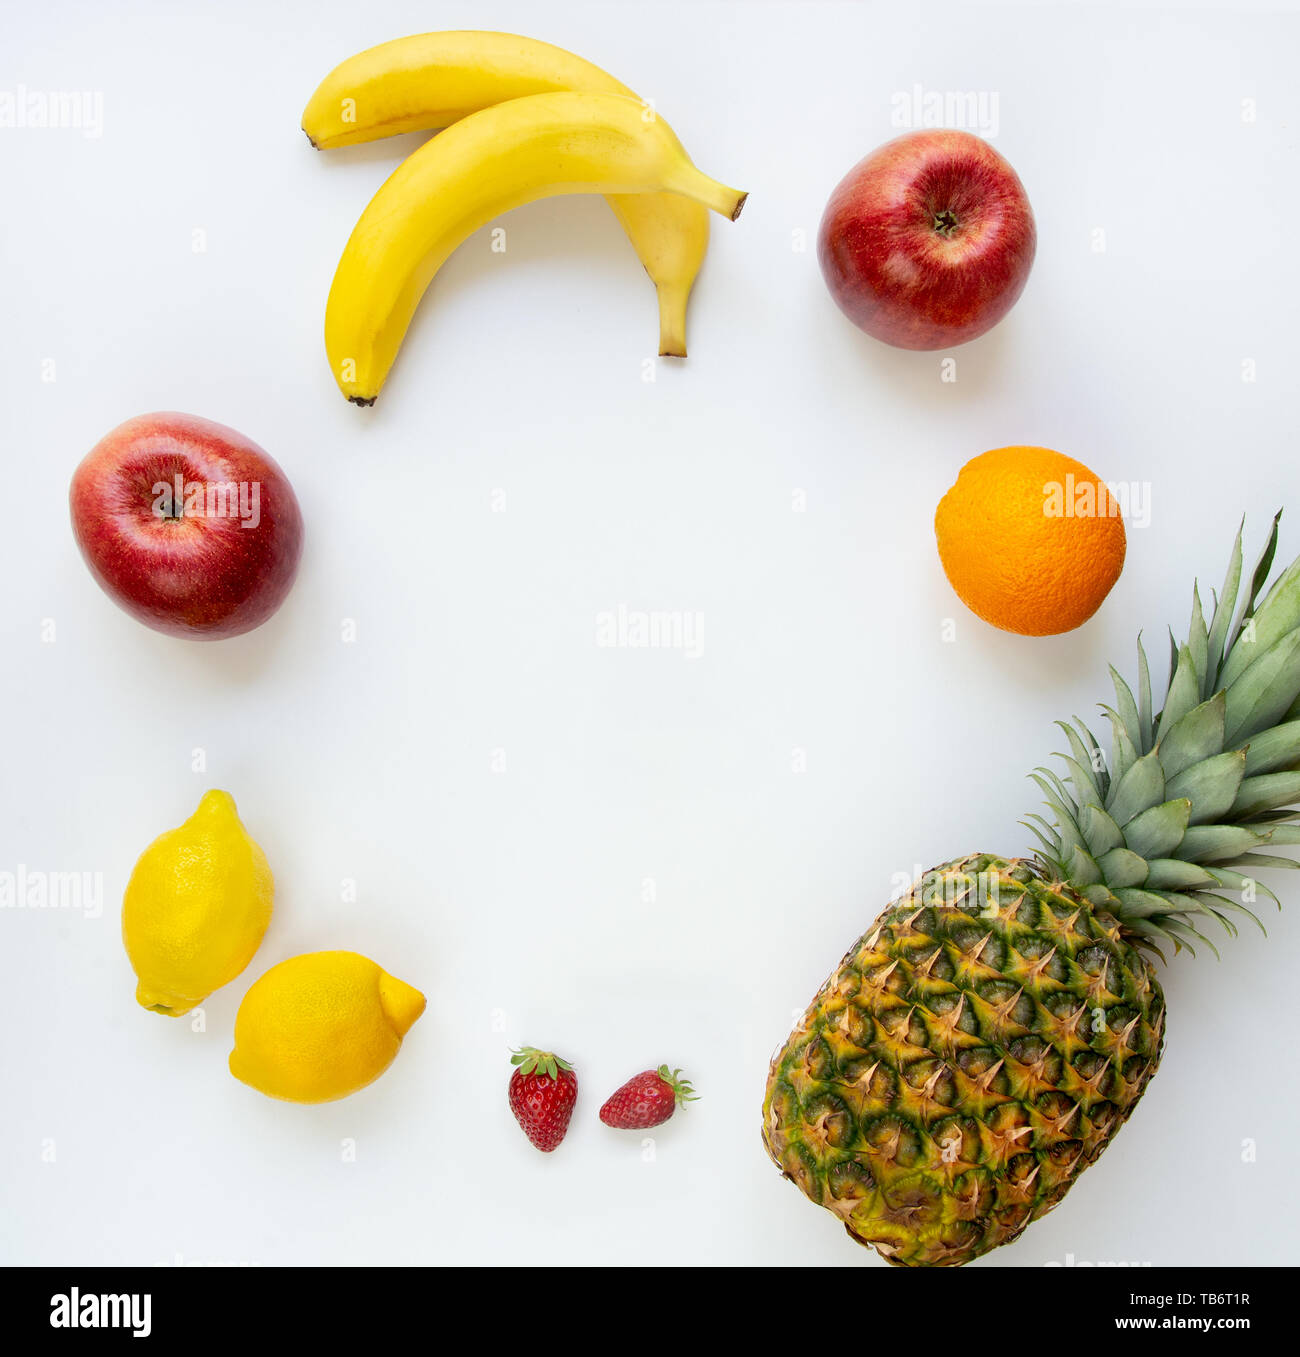 Top view of various fruits arranged in circle on a white background. Copy space. Stock Photo